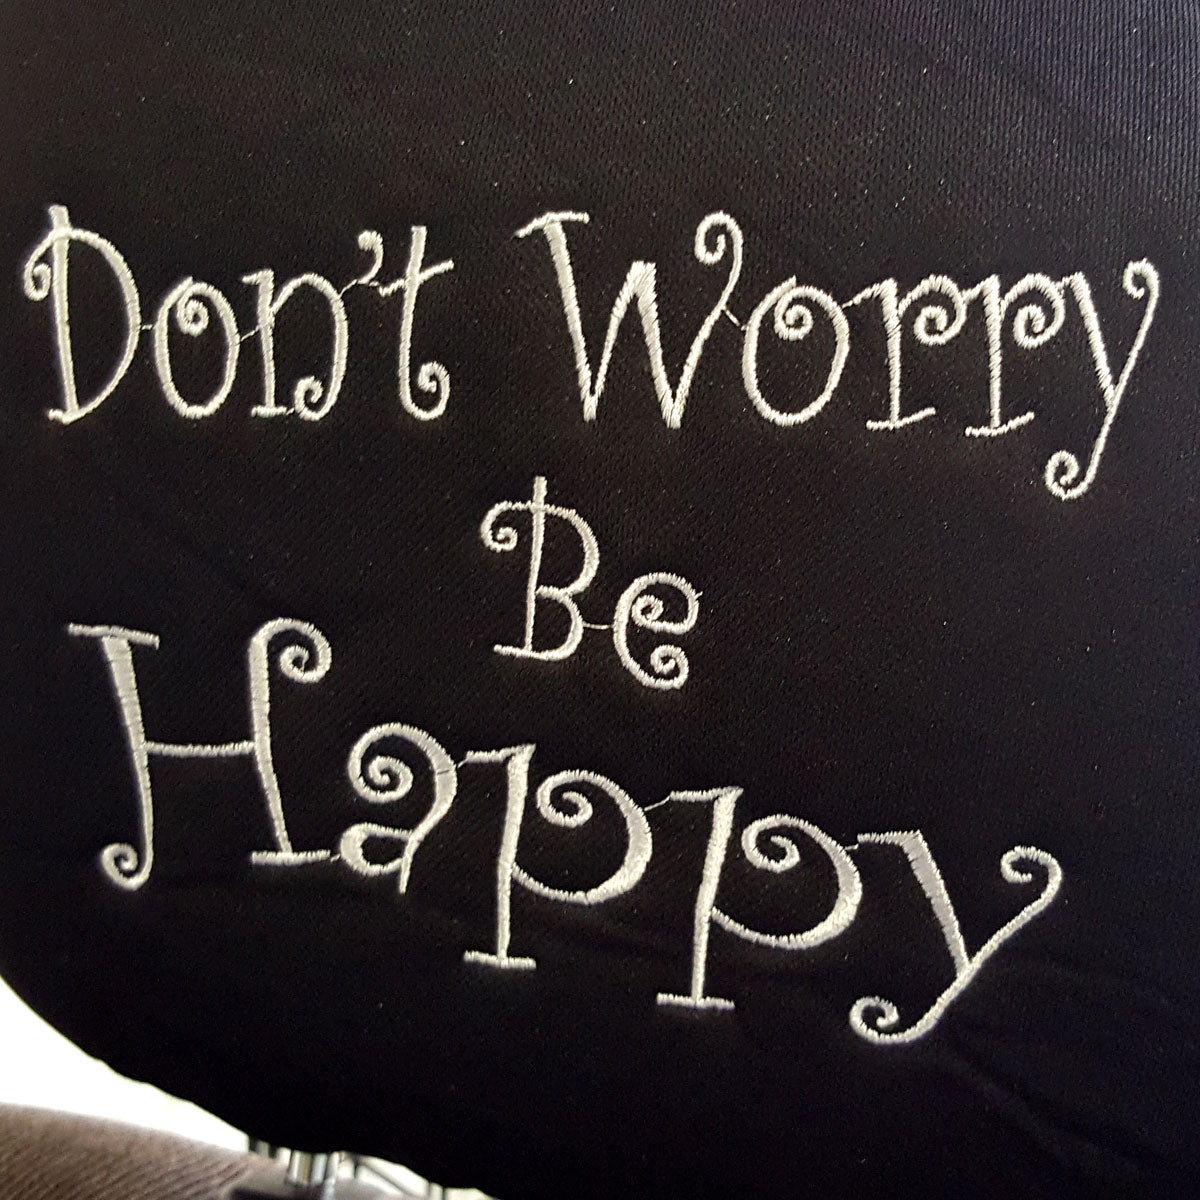 Embroidery Don't Worry Be Happy Logo Design Auto Truck SUV Car Seat Headrest Cover Accessory 1 Piece - Yupbizauto